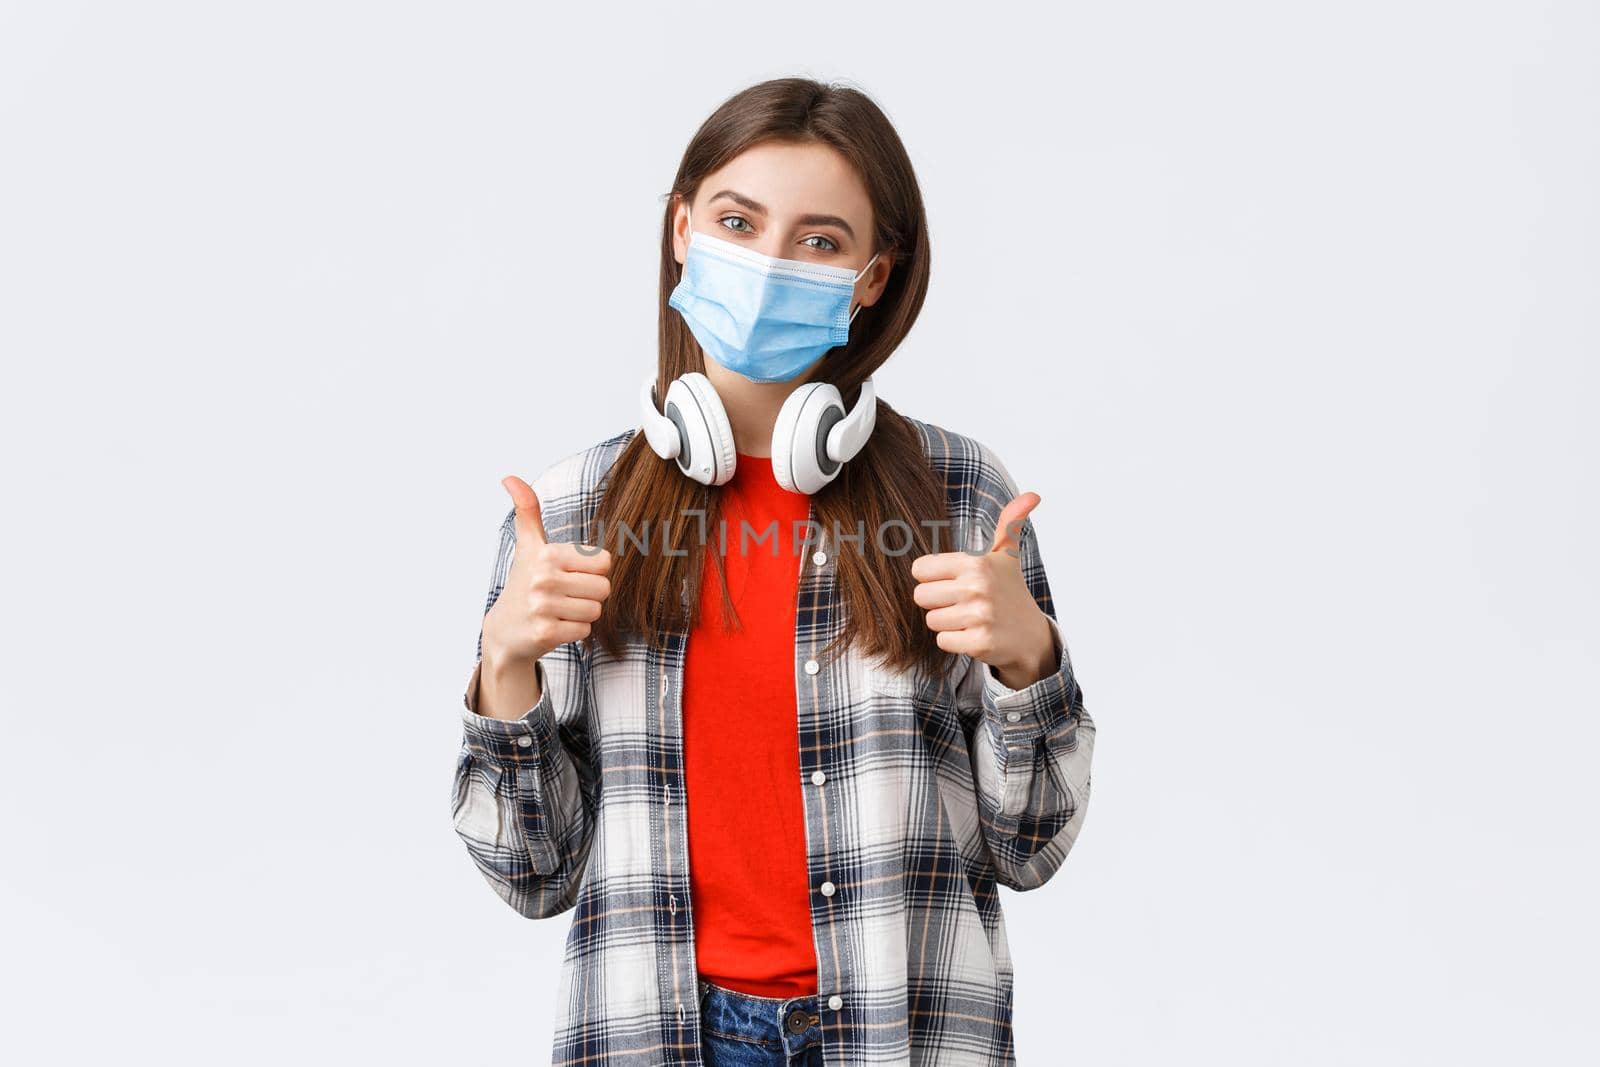 Social distancing, leisure and lifestyle on covid-19 outbreak, coronavirus concept. Cute pleased young caucasian woman in medical mask, take-off headphones to say yes or good, make thumb-up sign by Benzoix